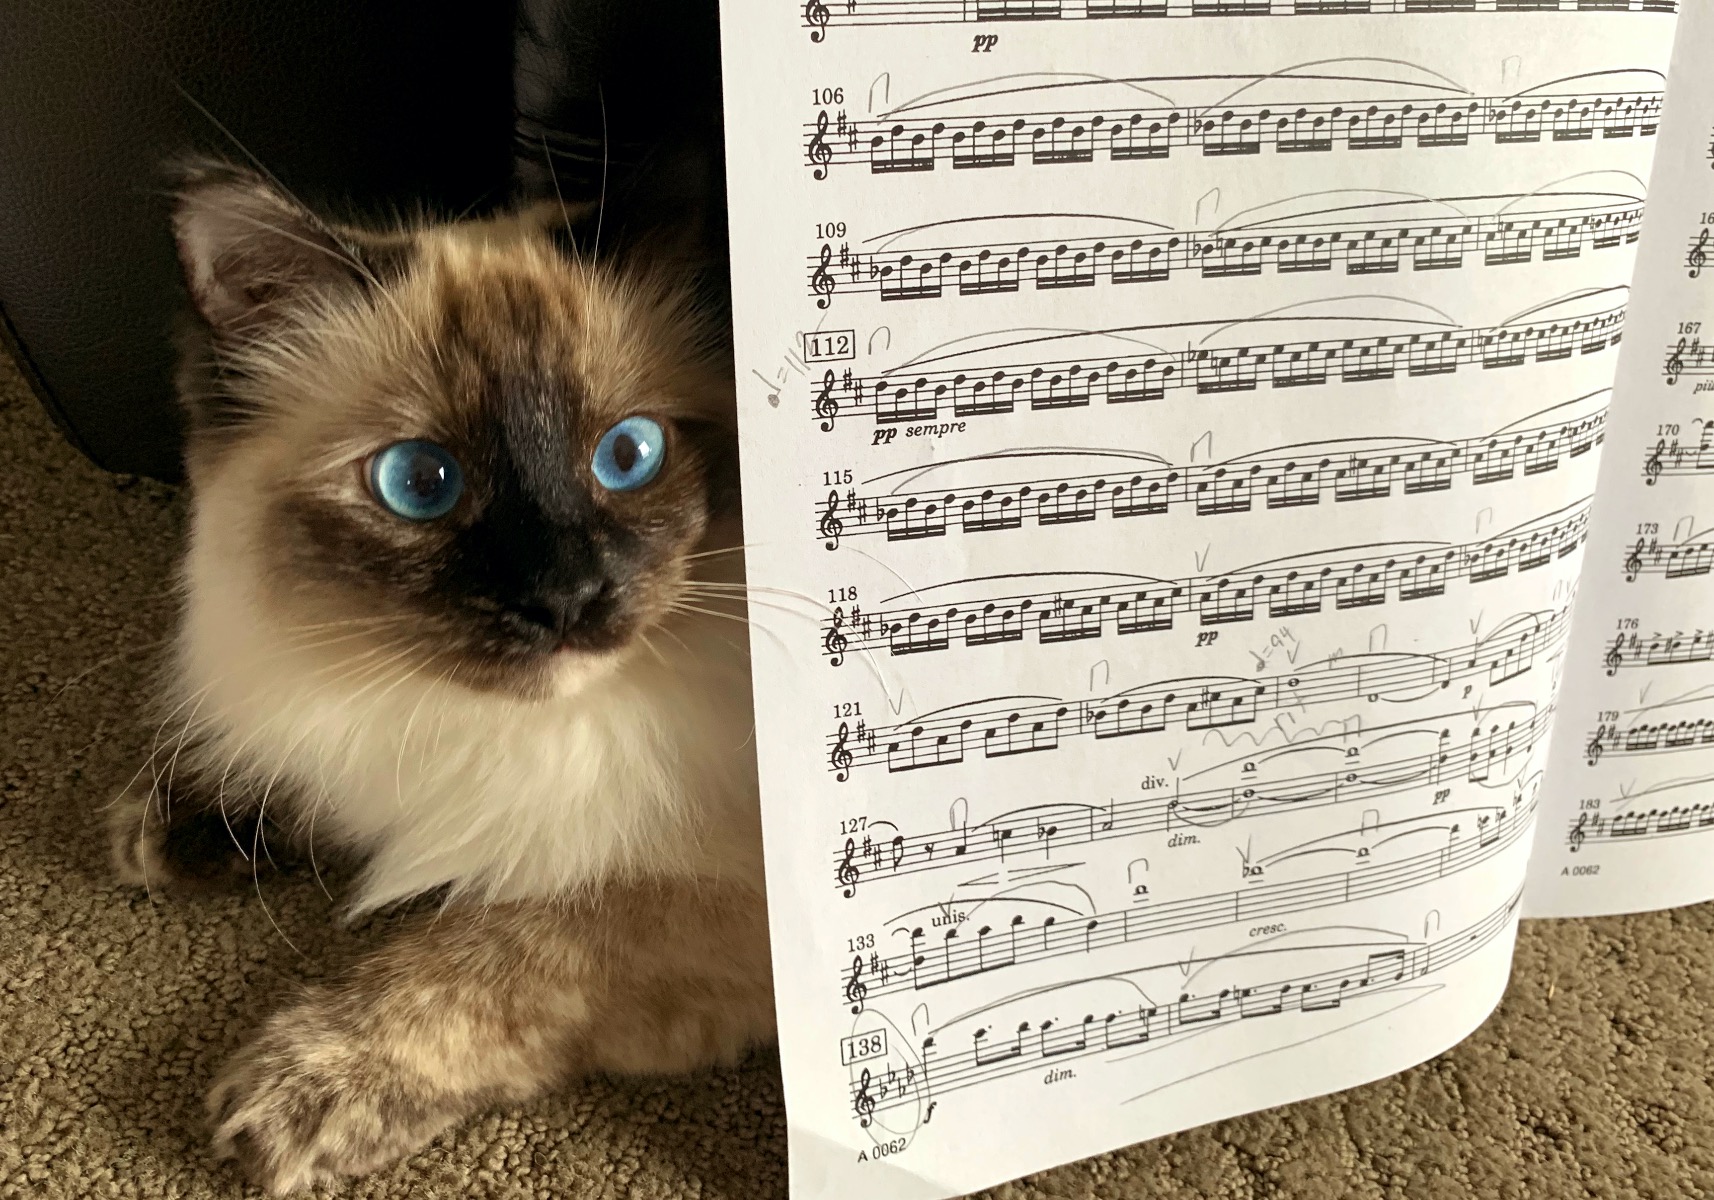 Fluffy Ragdoll Siamese cat behind sheet music to the Hebredes Overture